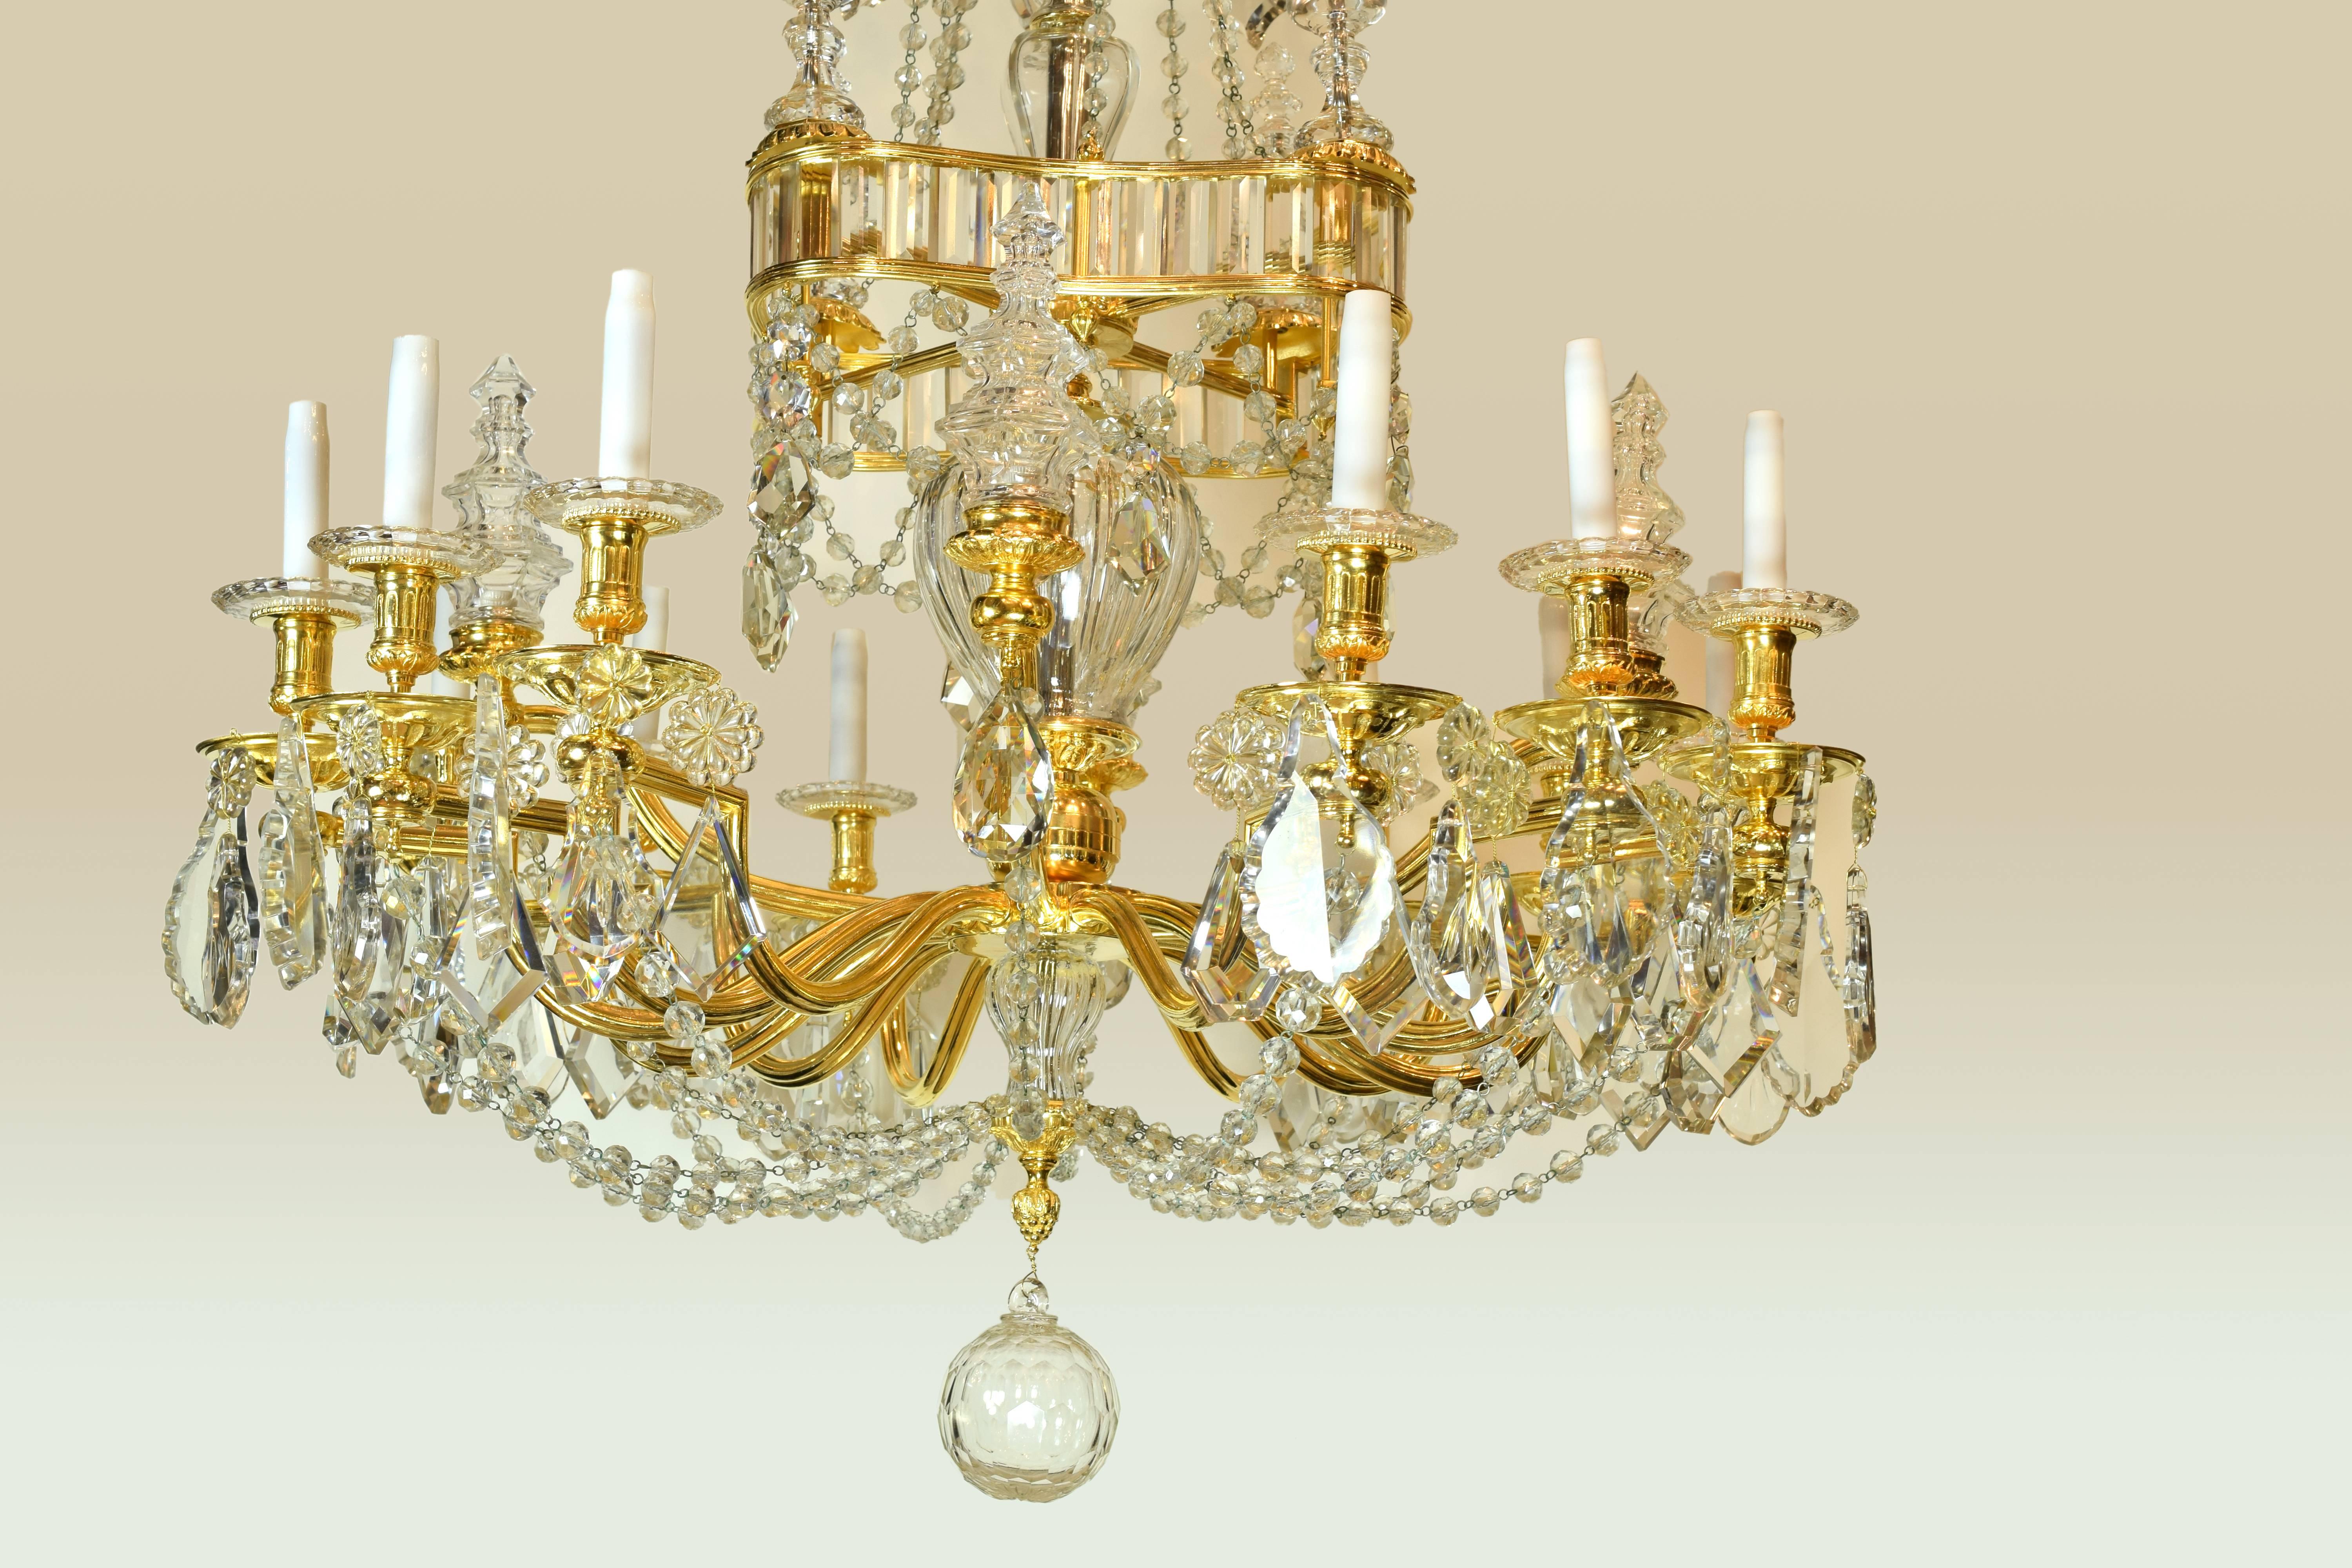 Gilt bronze and Baccarat glass chandelier, France, 19th century.
Ceiling chandelier made of gilt bronze with a central axis highlighted by glass elements with vase and baluster shapes. Around this centre a series of elements have been arranged in